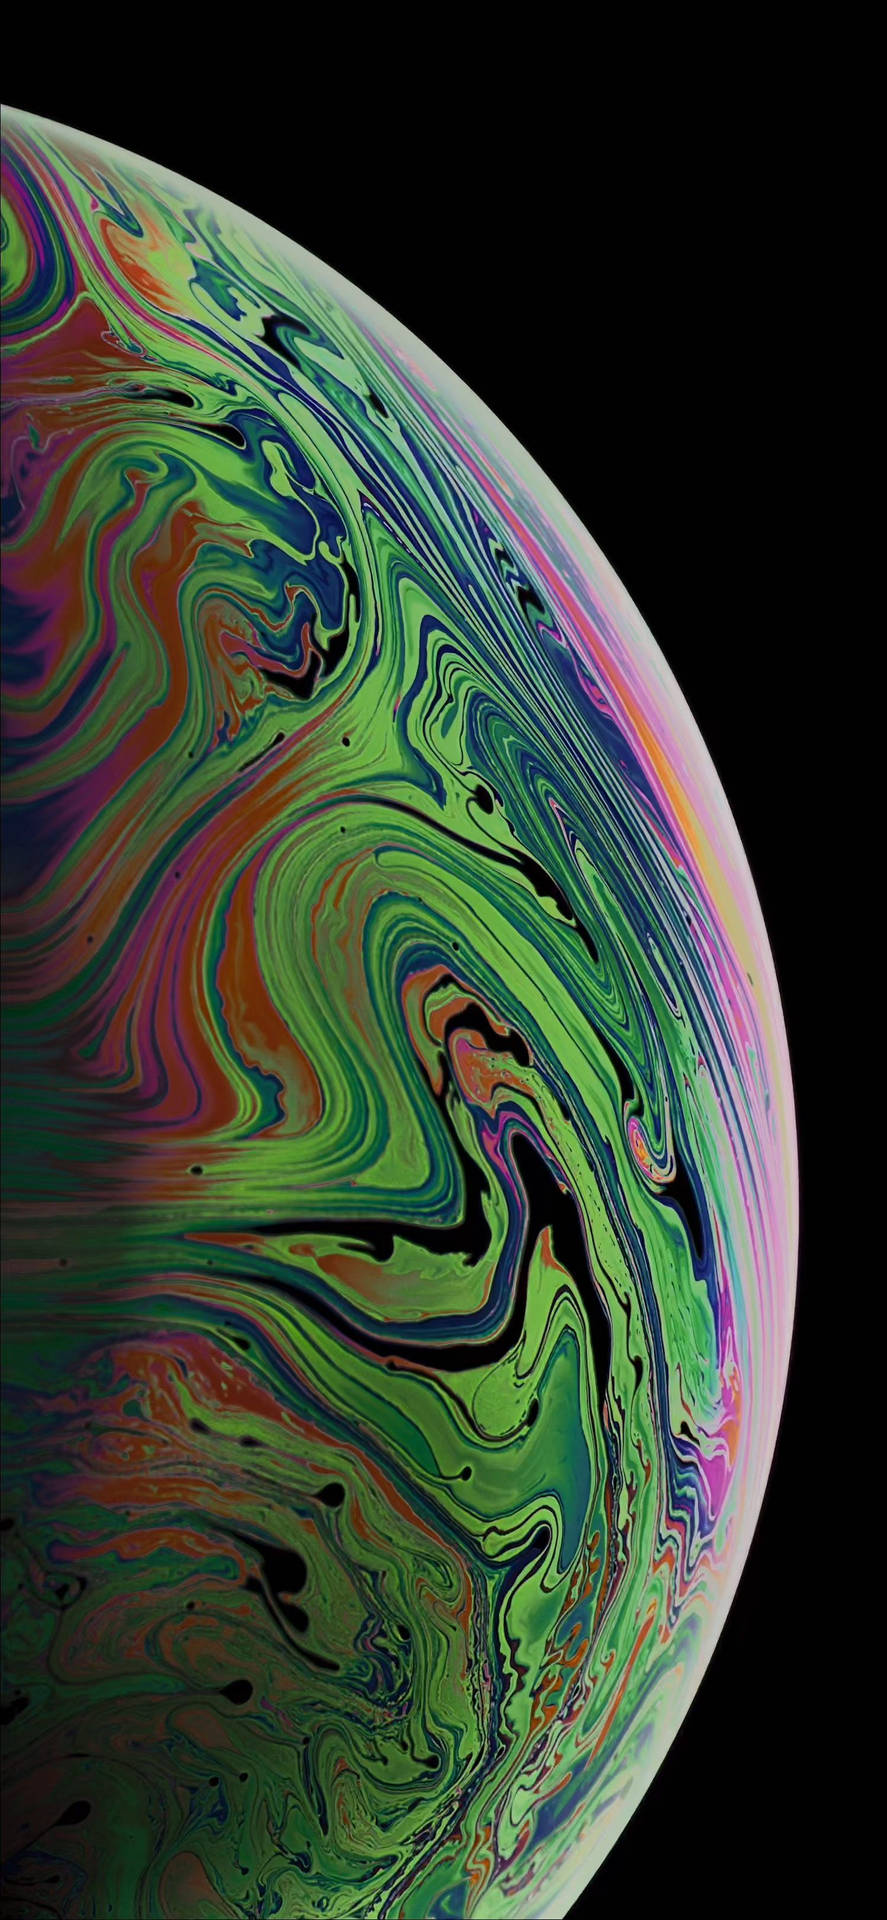 Green Gaseous Planet Iphone 8 Live Wallpaper